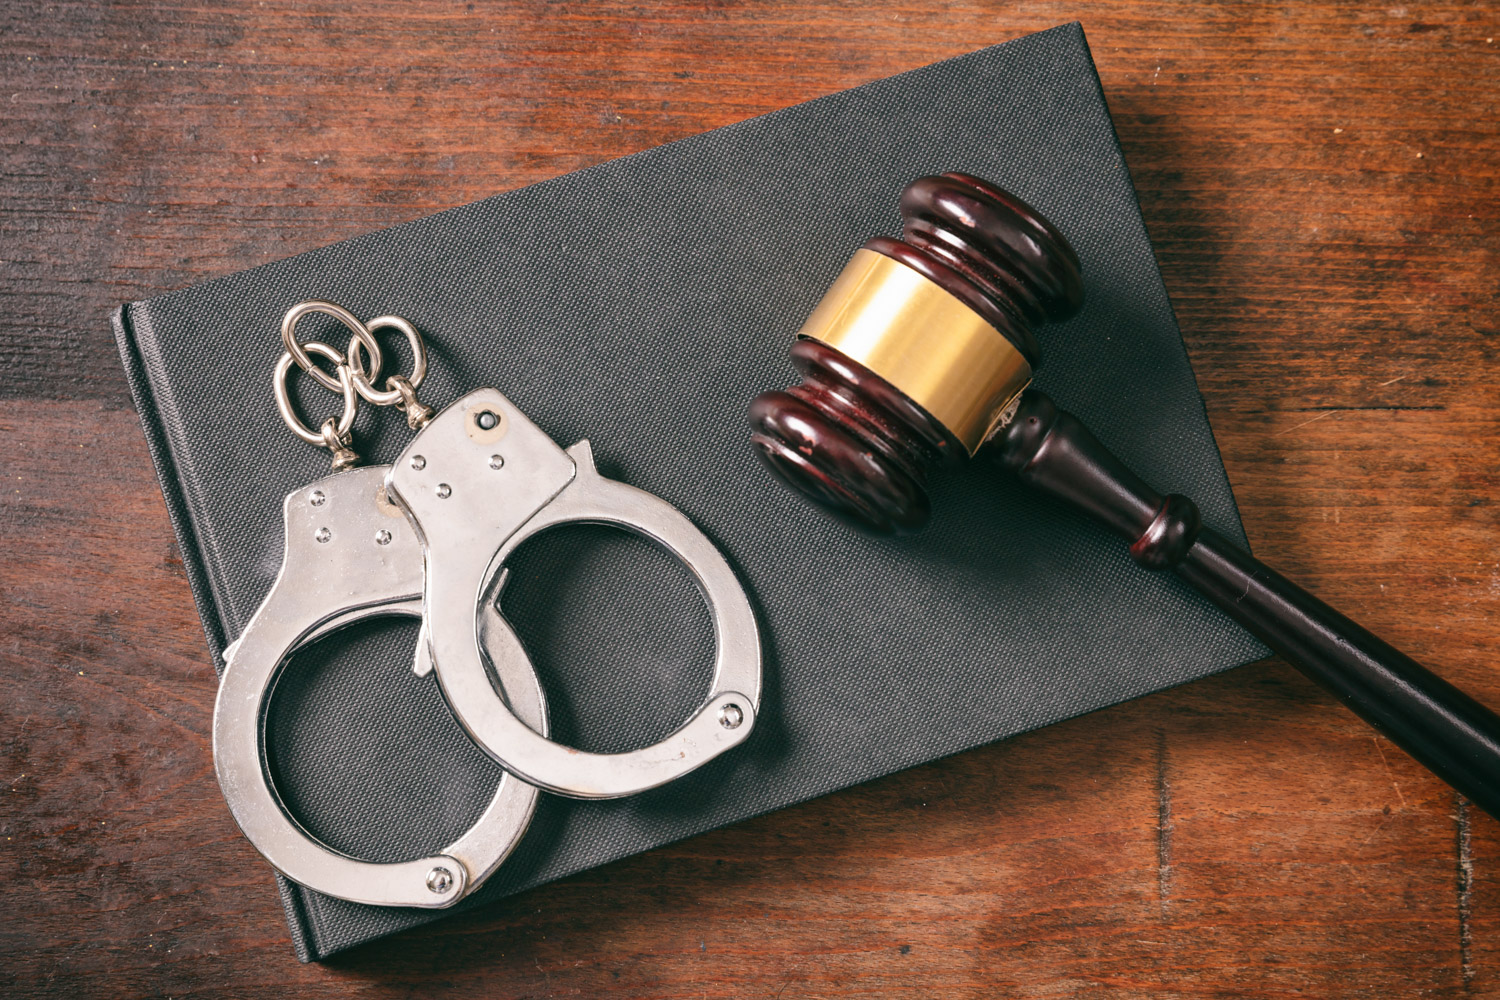 What is the benefit of having my Florida criminal record sealed or expunged?: Fort Lauderdale Criminal Defense Attorney explains